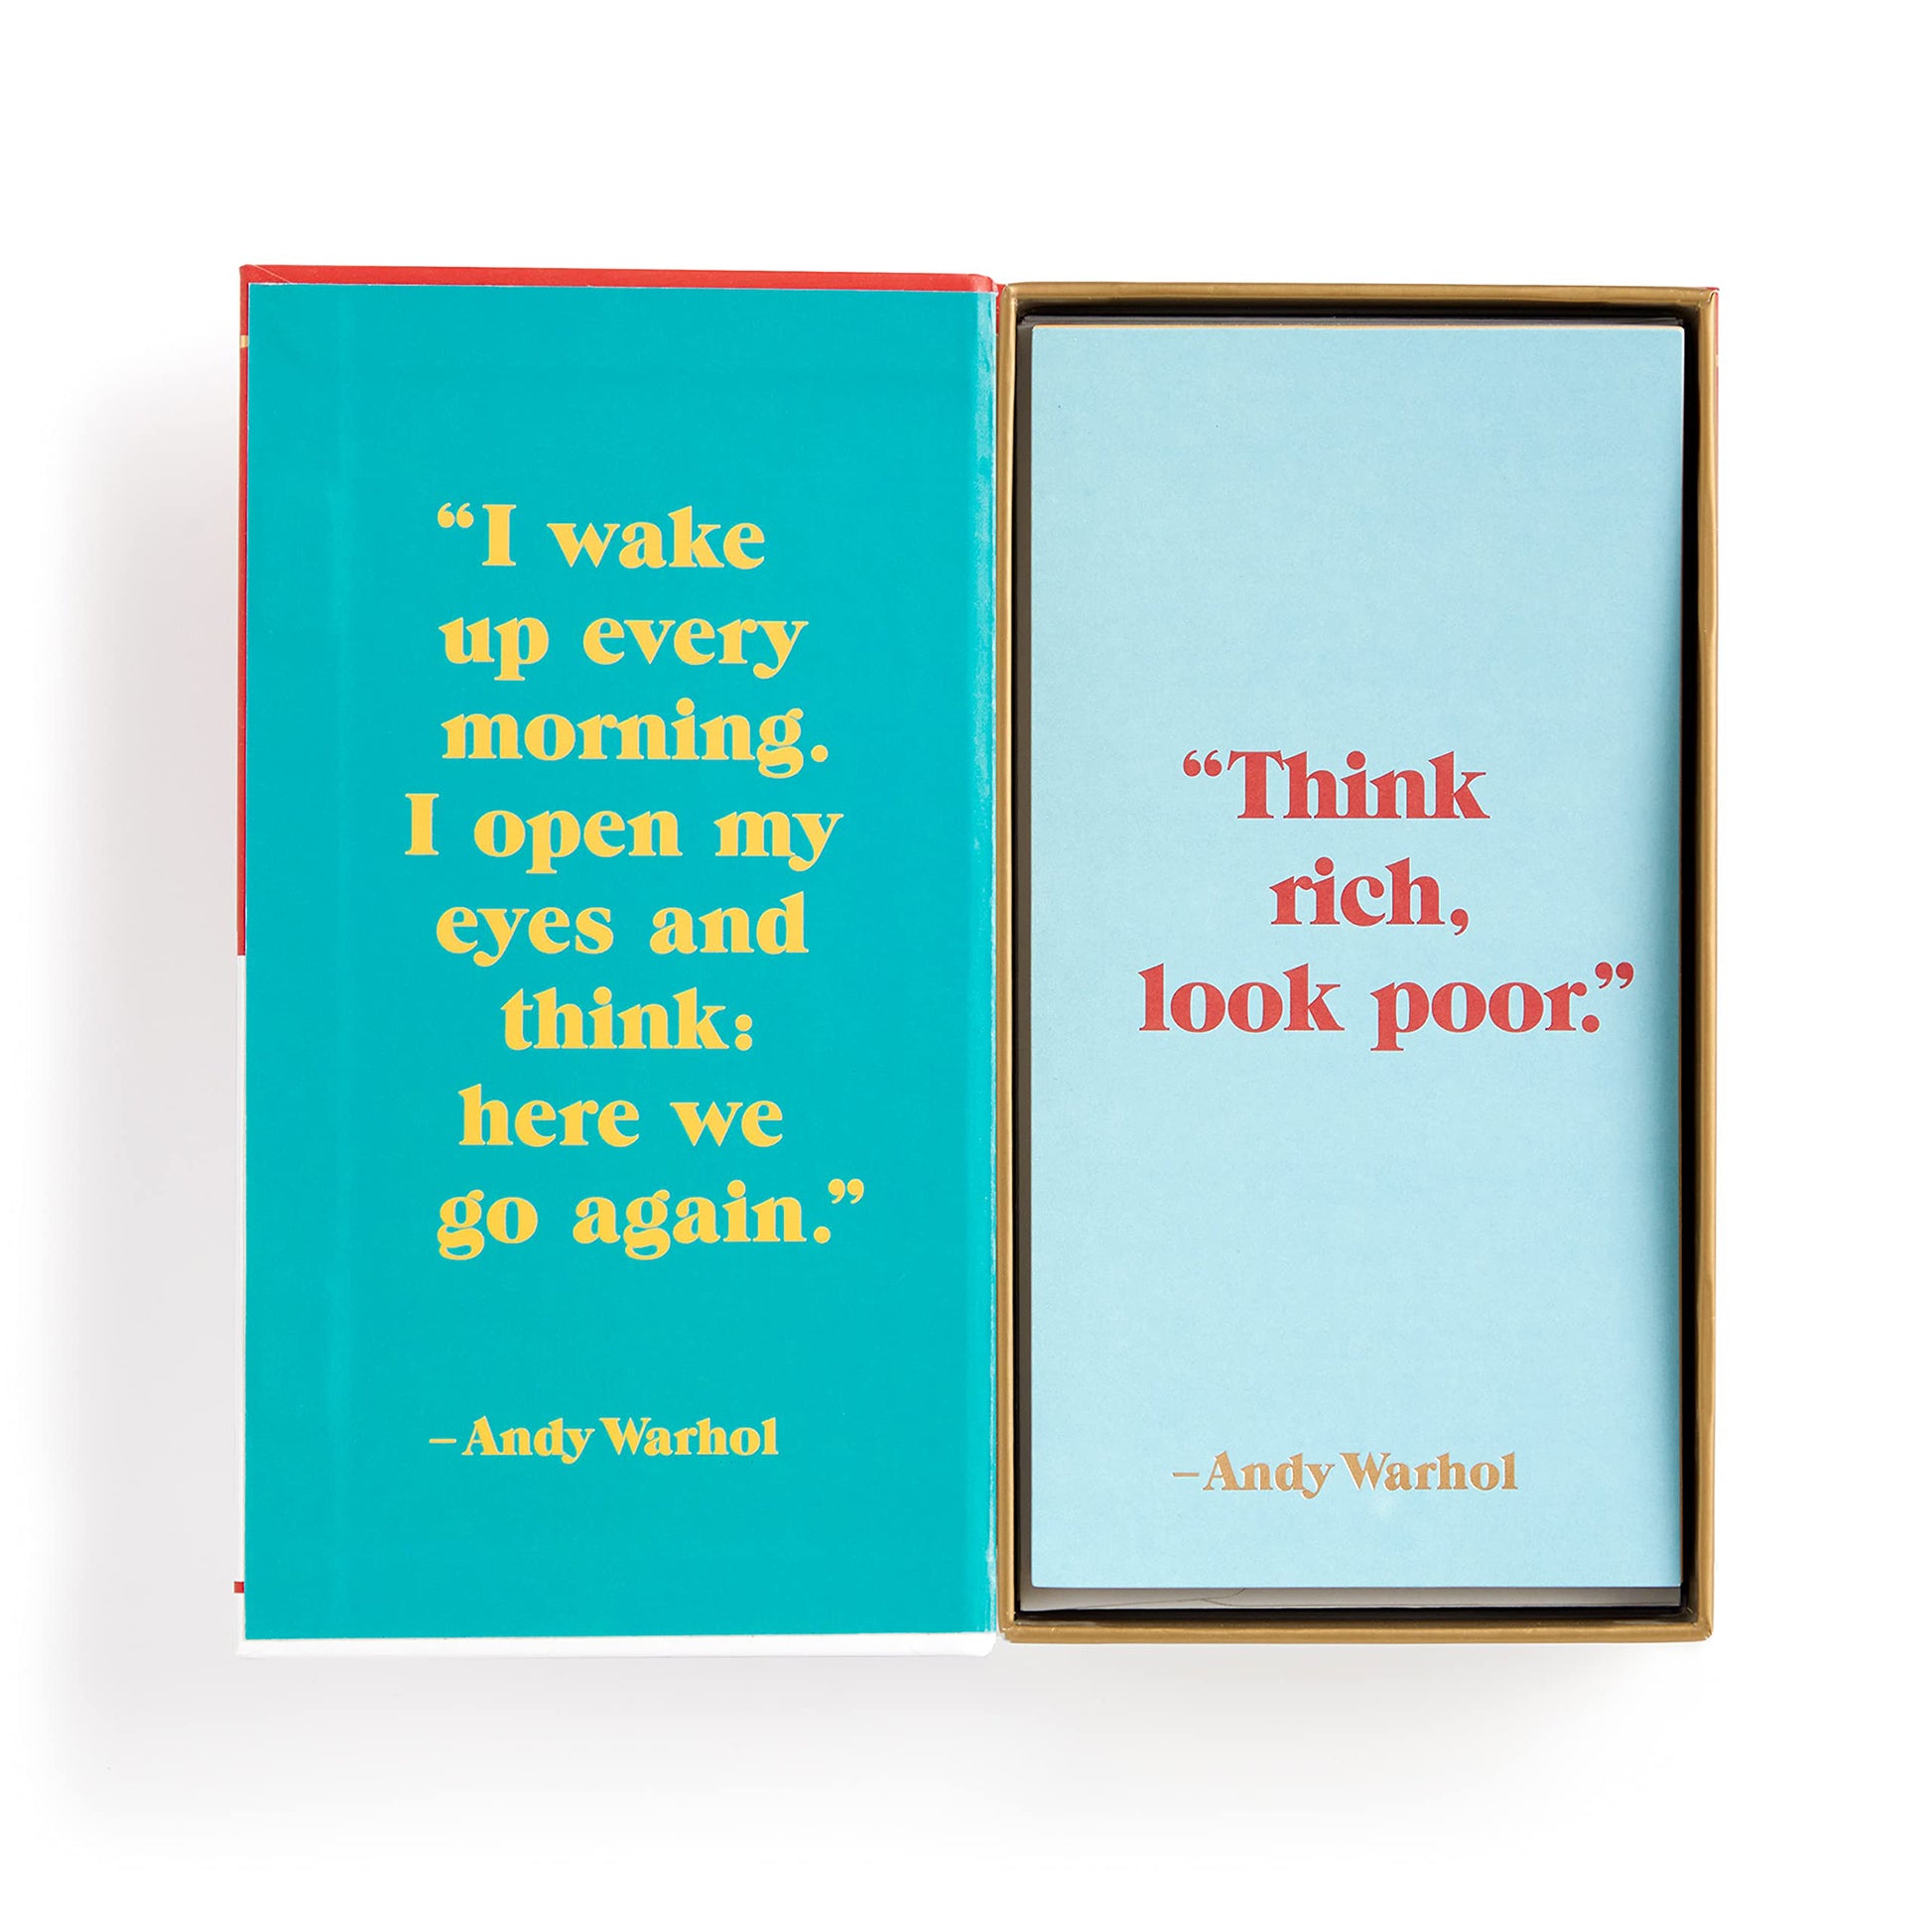 Andy Warhol Philosophy Correspondence Cards (Boxed Set)